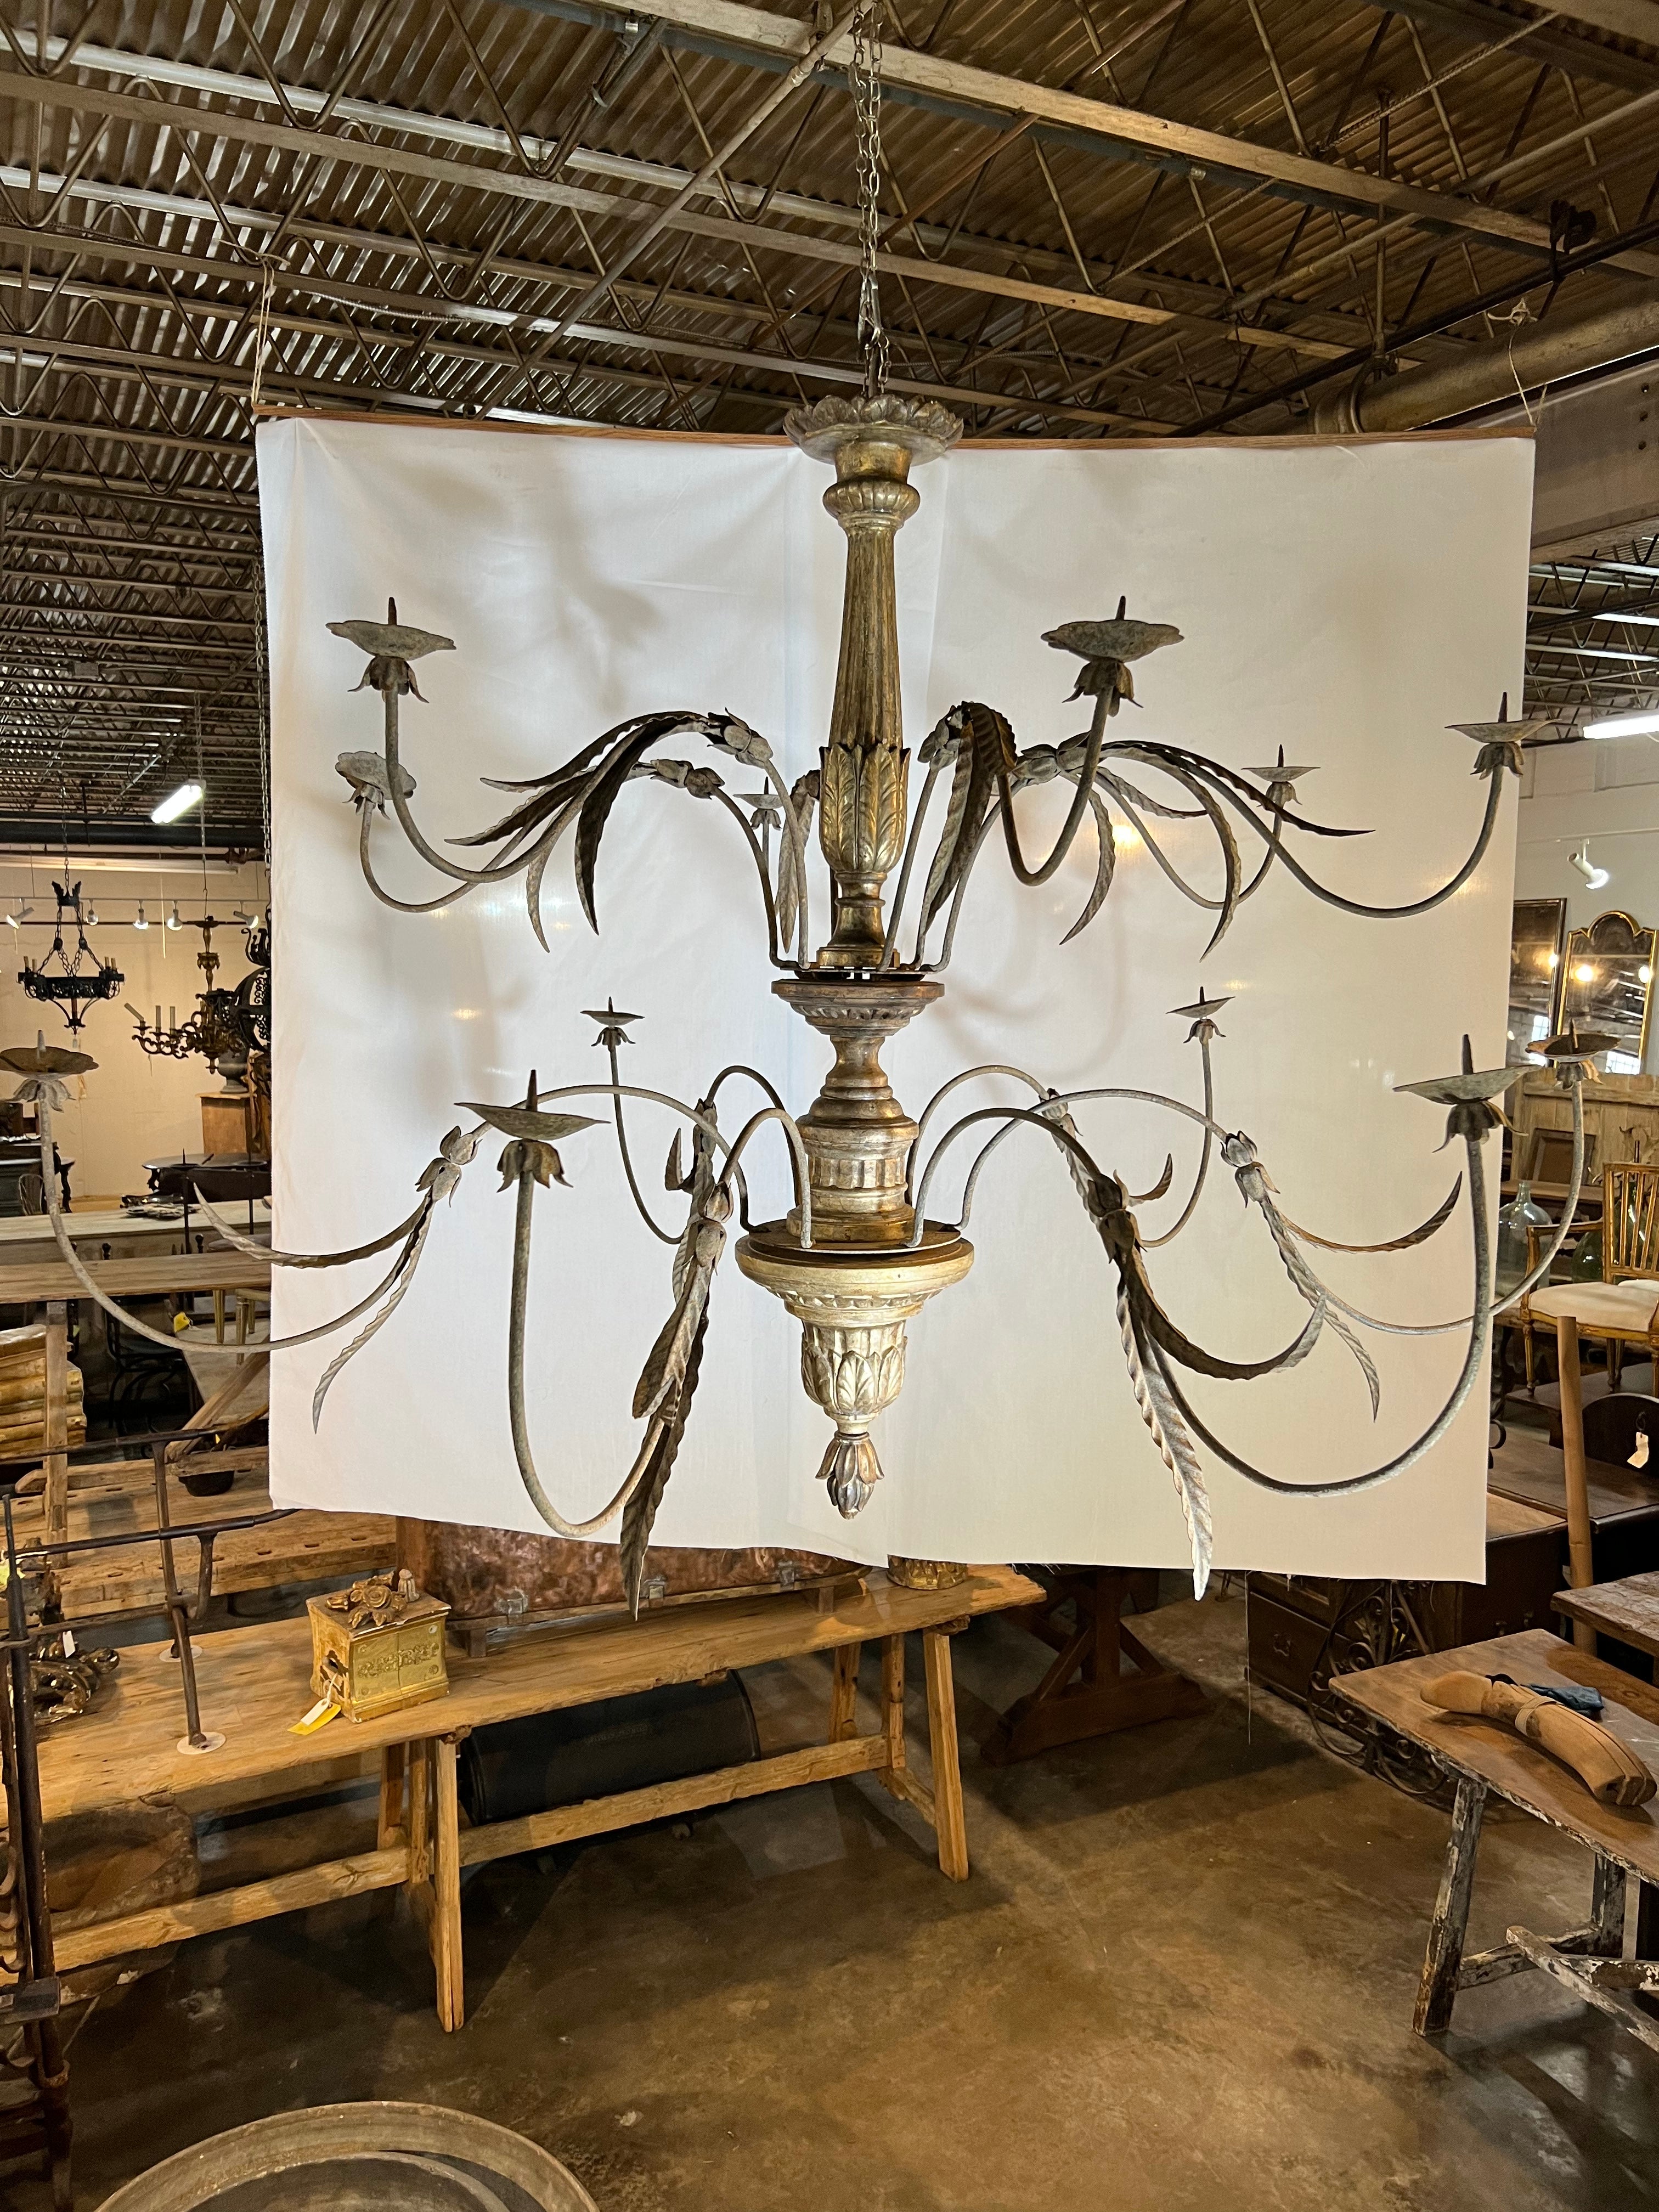 An outstanding and exceptional mid-18th century 2-Tiered Chandelier from Genoa, Italy, Beautifully constructed with a giltwood shaft and iron arms. The gilt technique is referred to as Mecca - mixing gold and silver gilt. The chandelier has 12 arms.